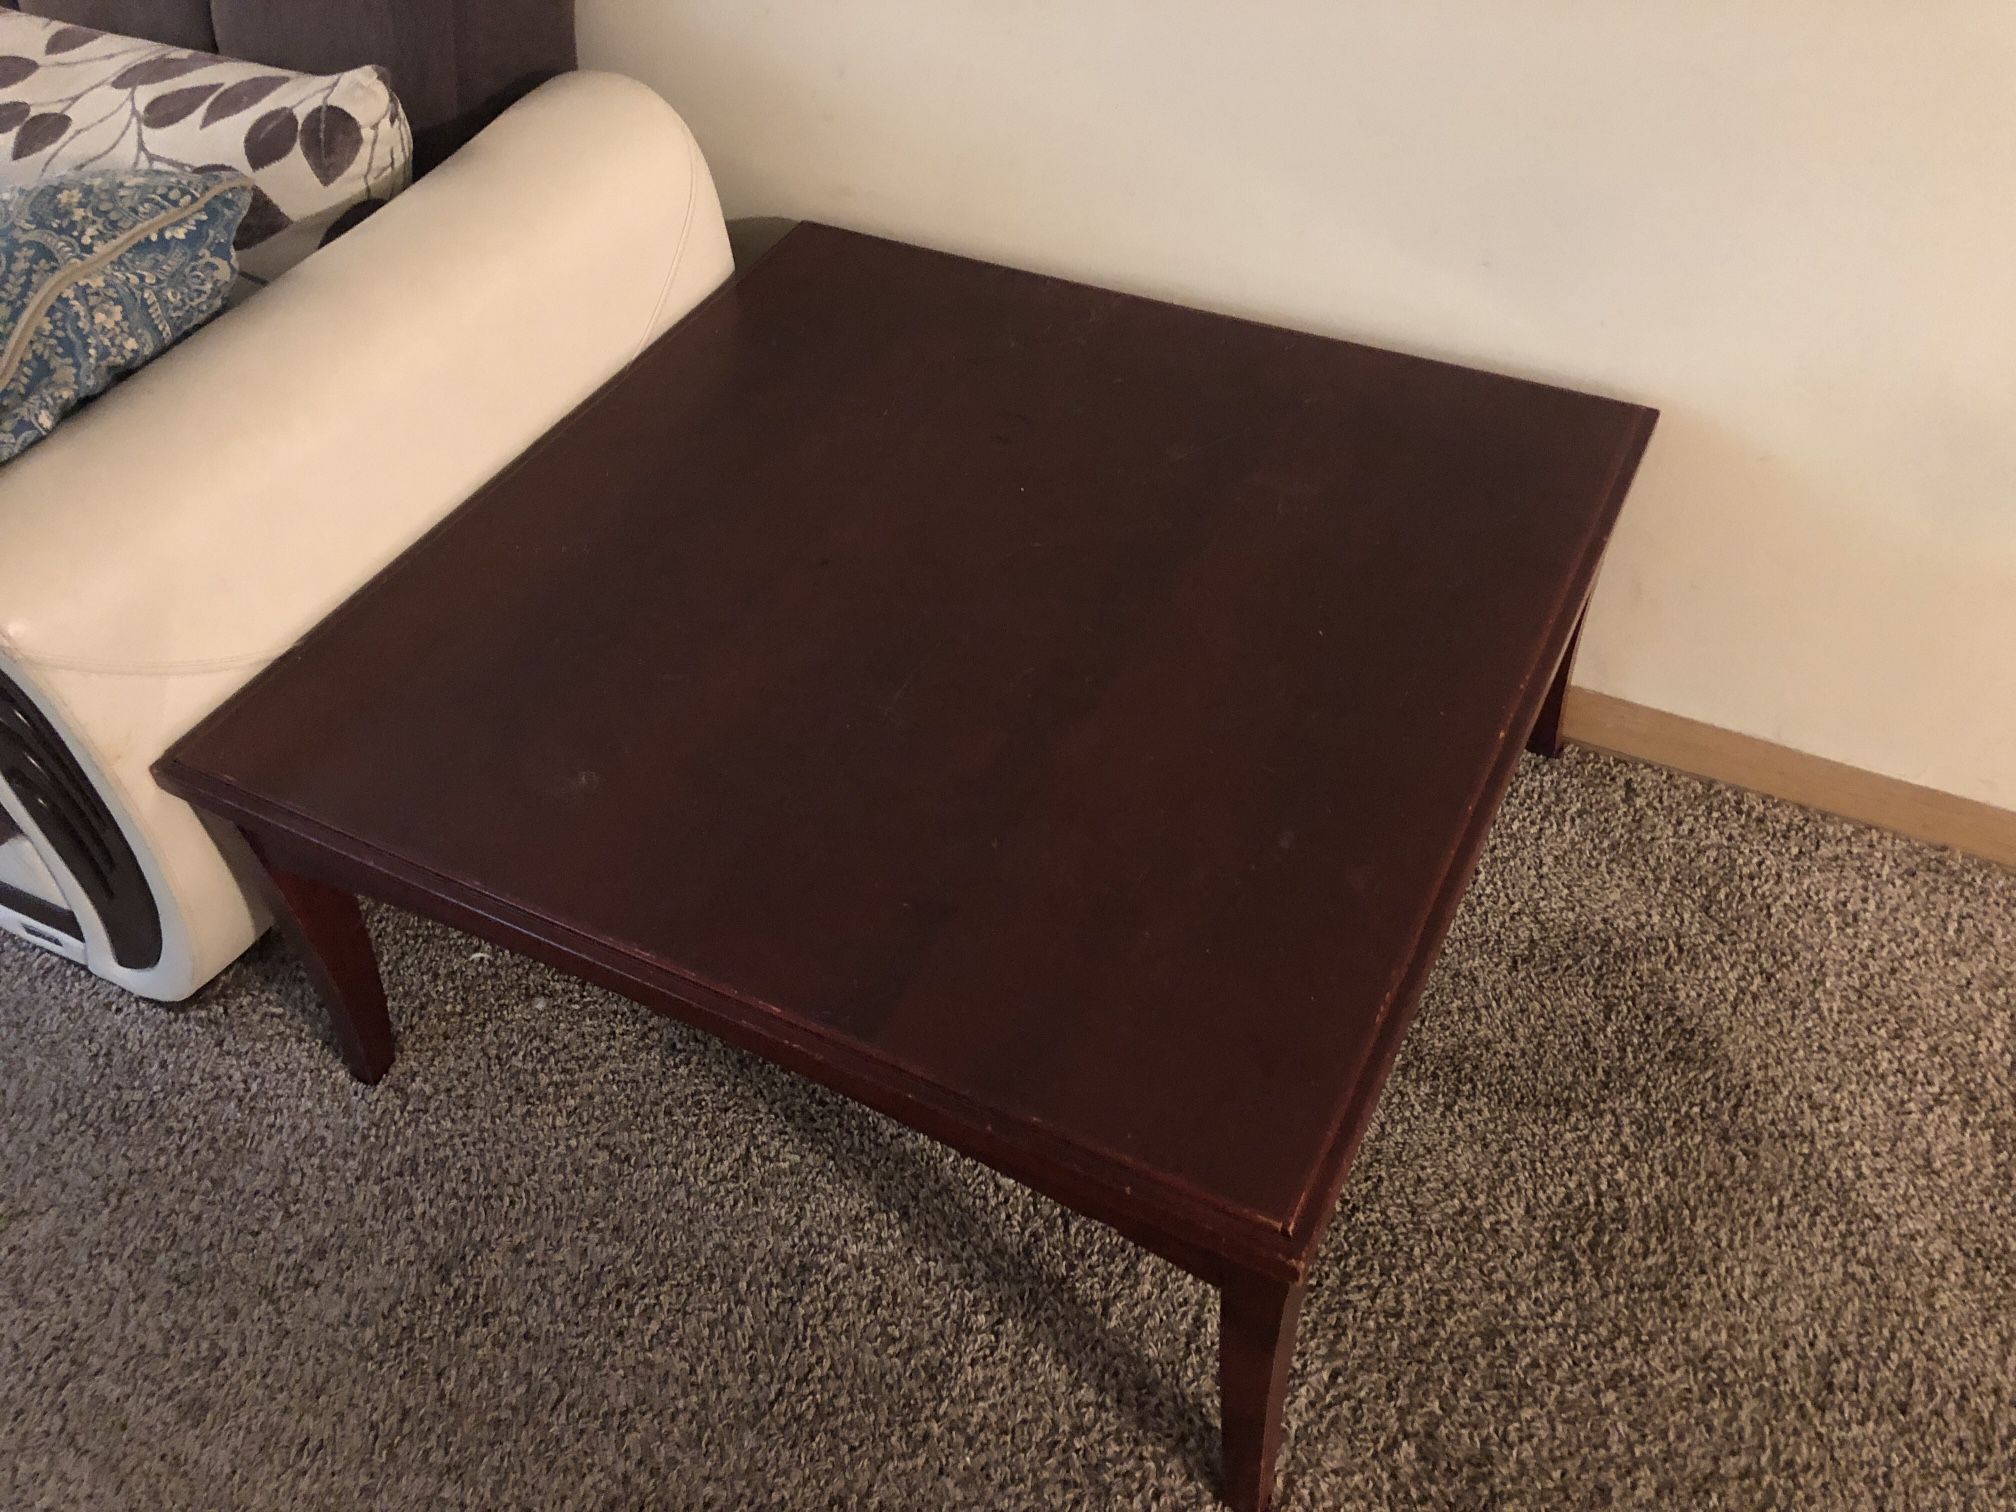 3 Couch Set And A Wooden Table